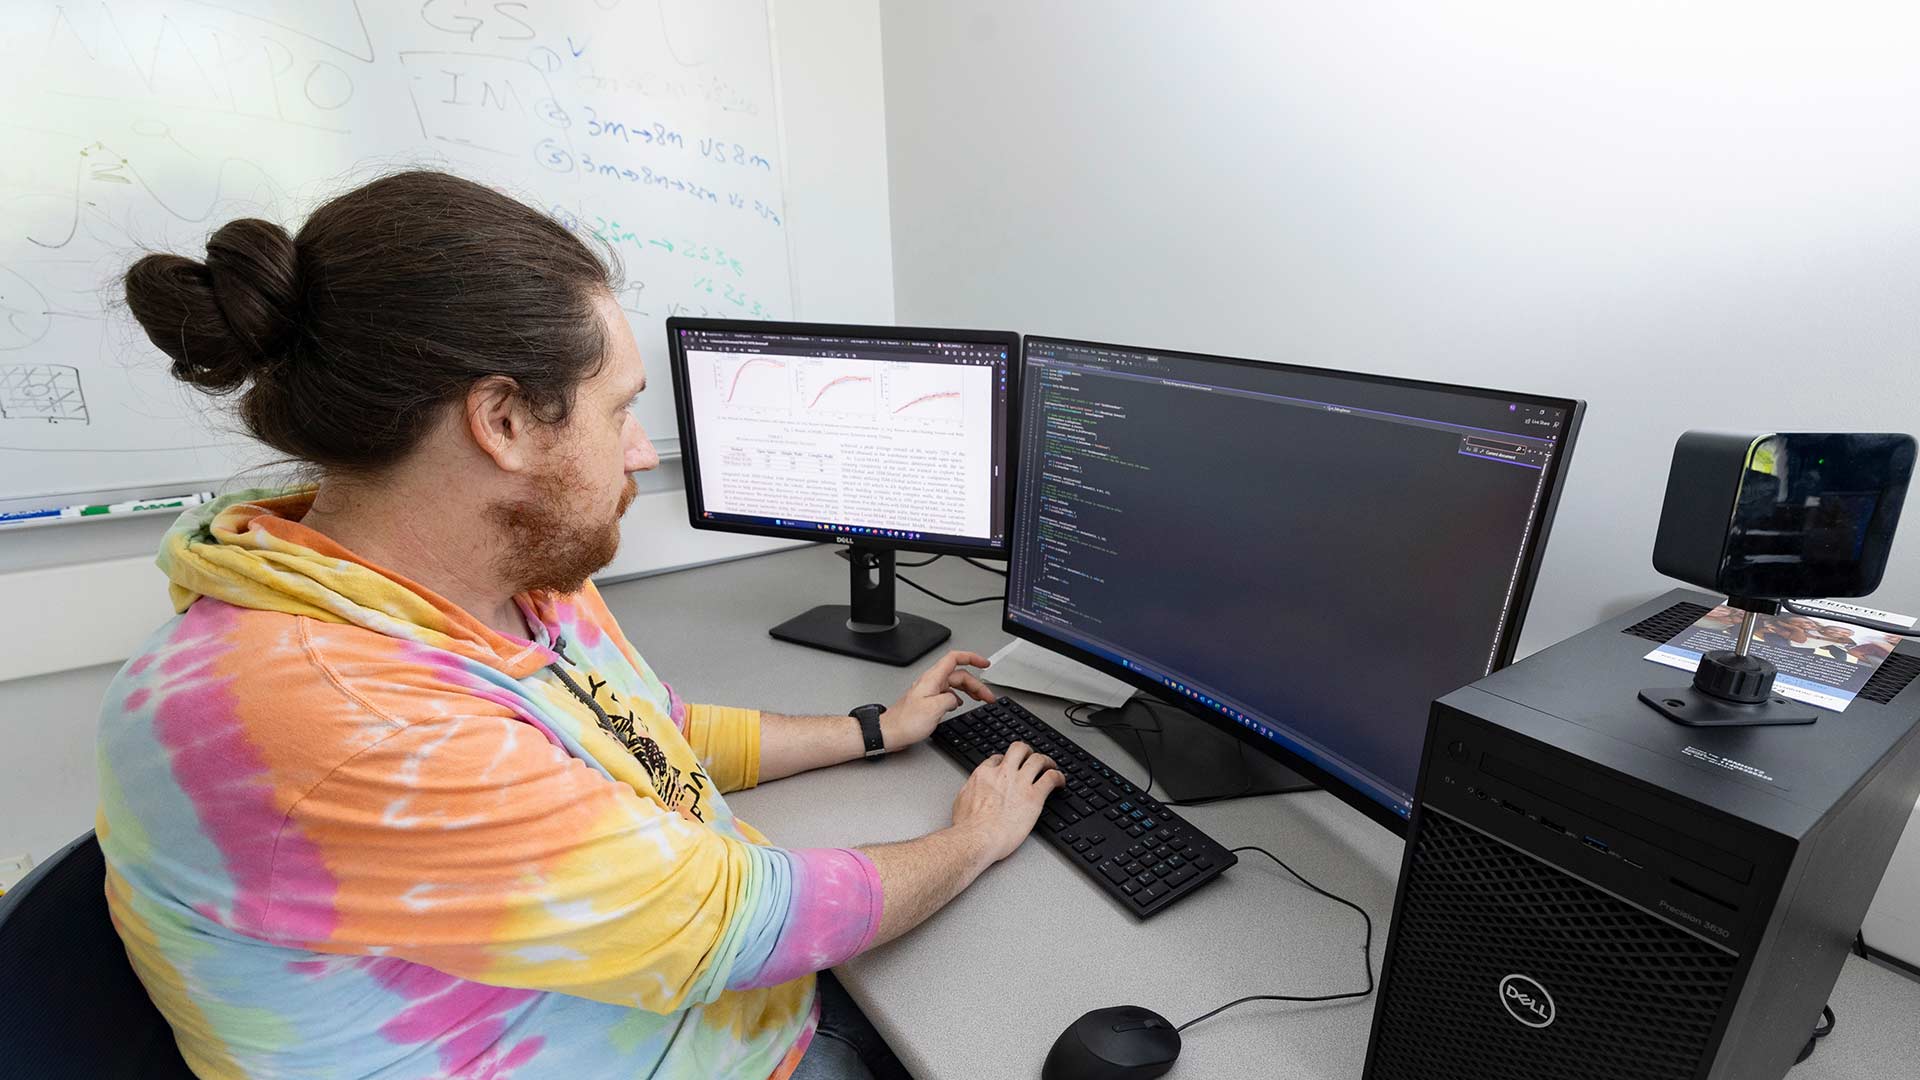 A computer science graduate student works on code at a computer station in a research lab on campus.